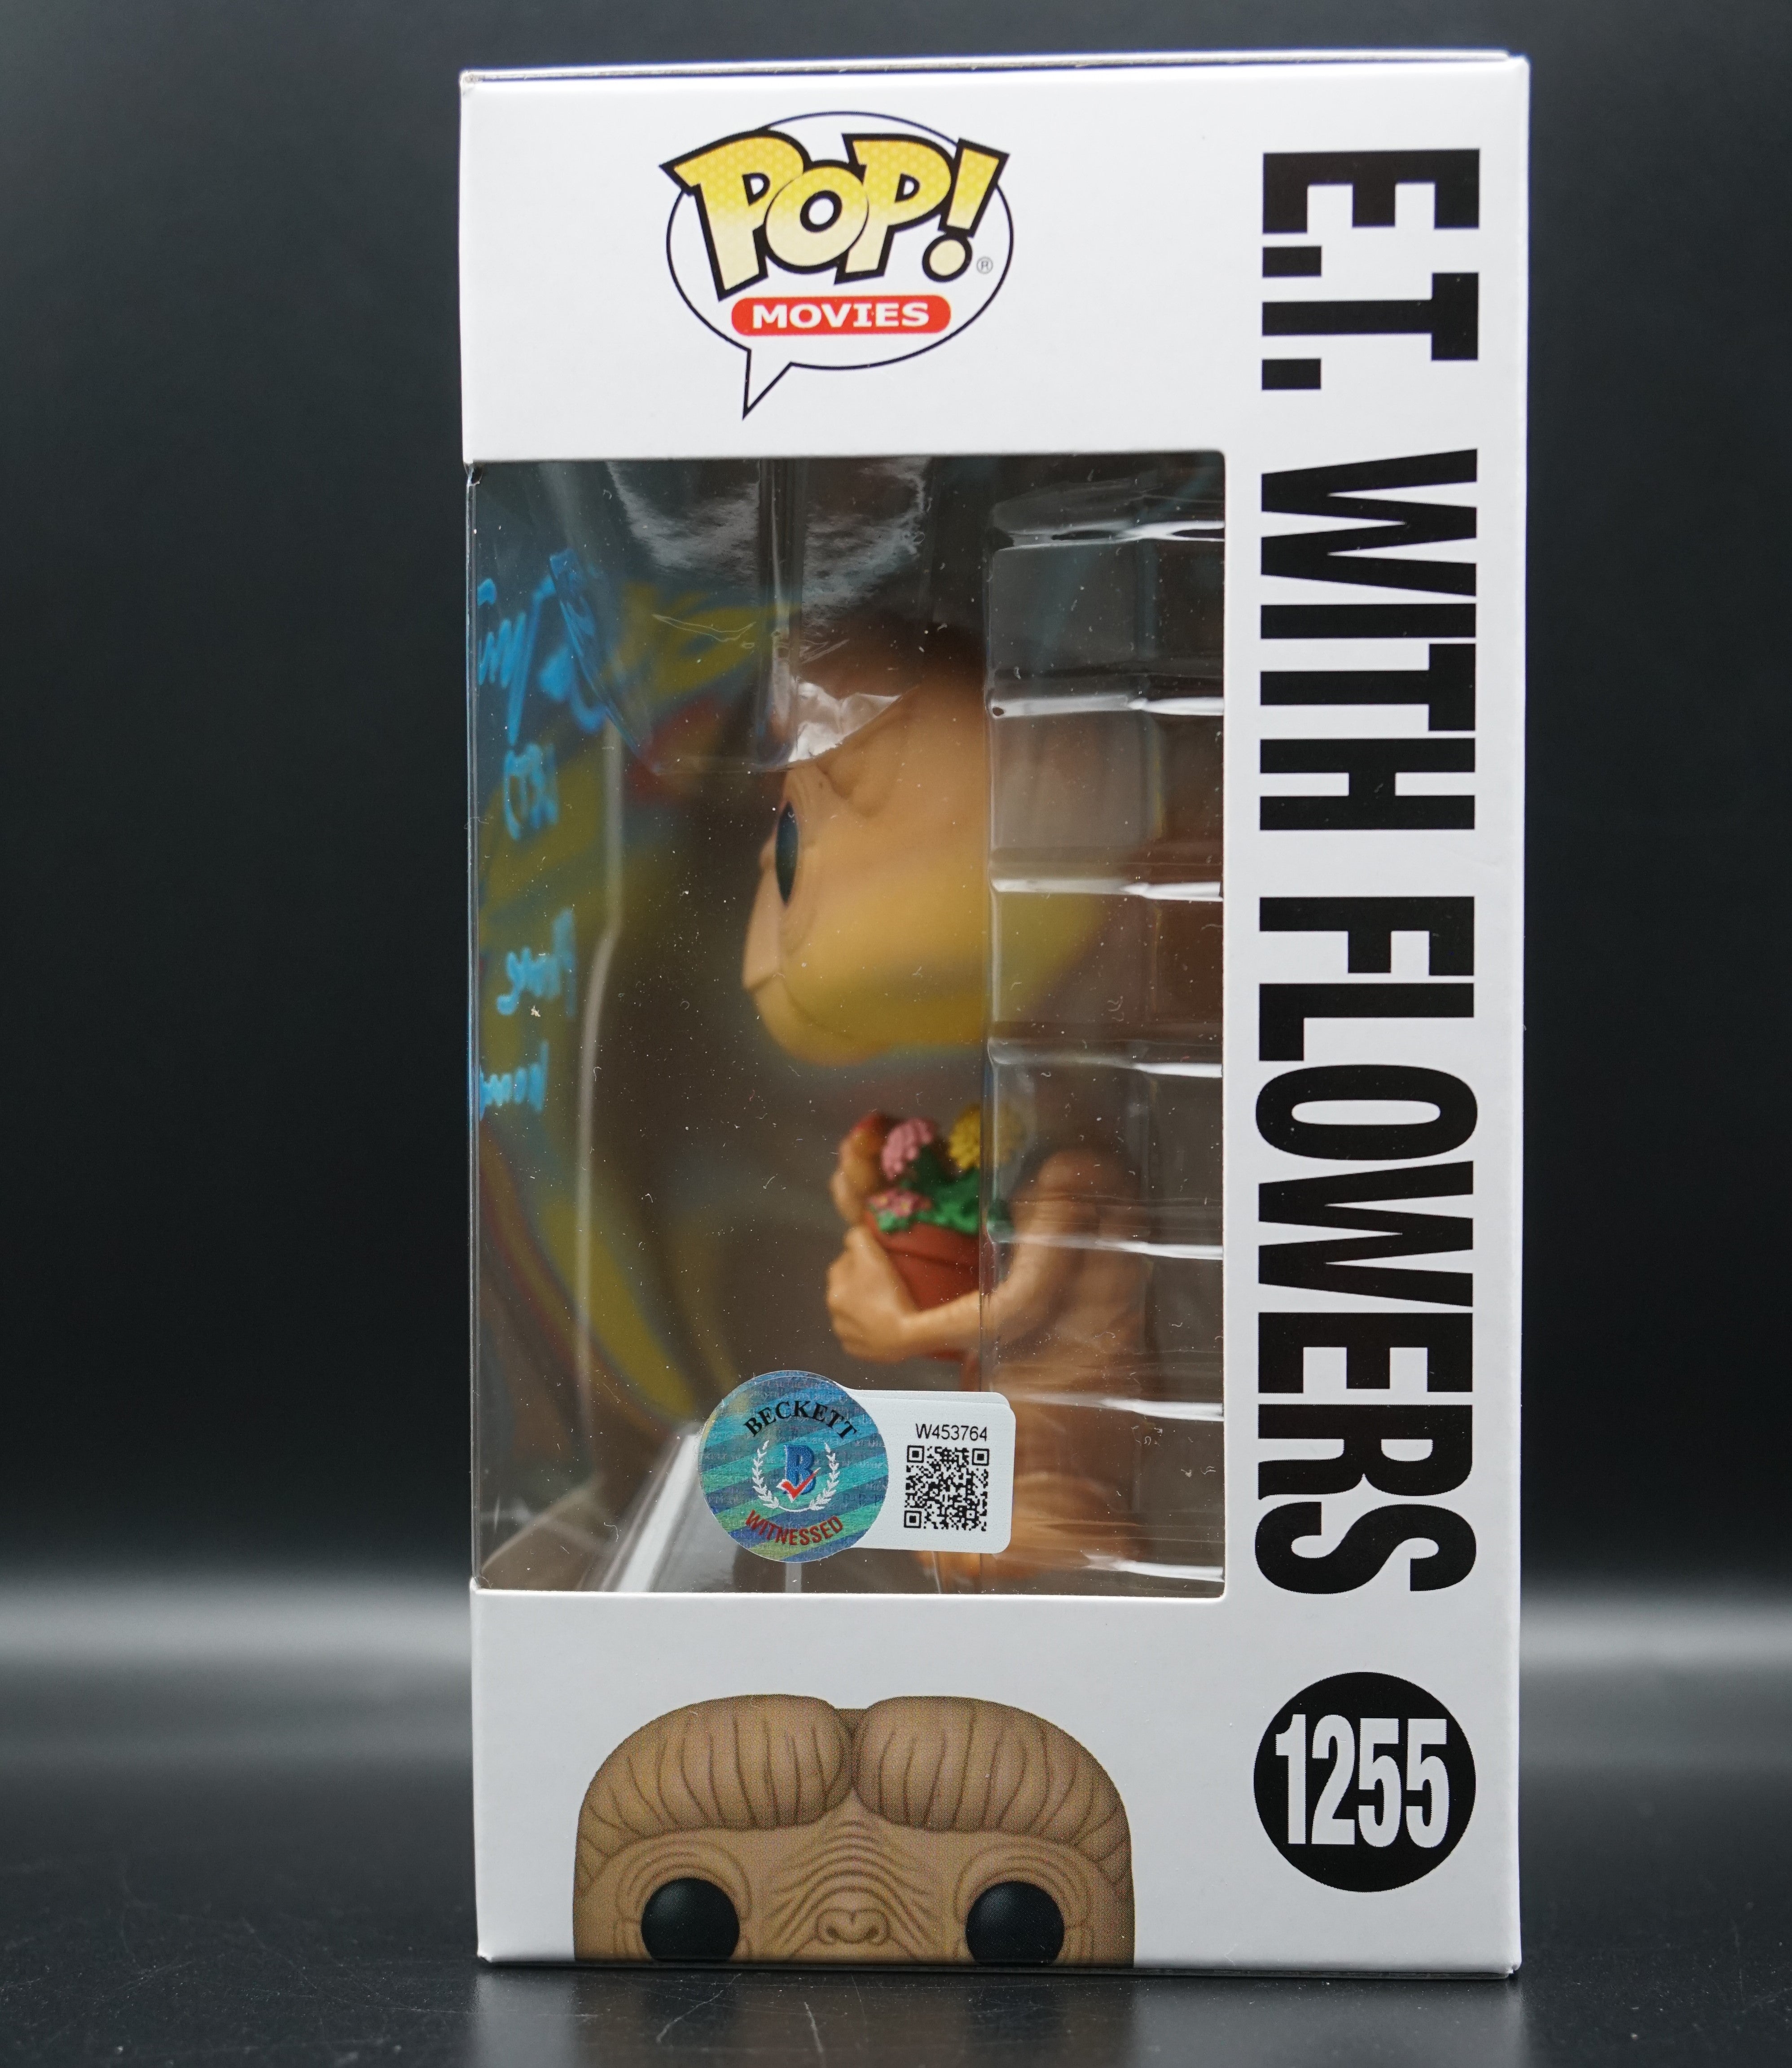 E.T. with Flowers #1255 Funko Pop - Signed by Matthew De Meritt with 'Phone Home' Inscription in Blue Paint